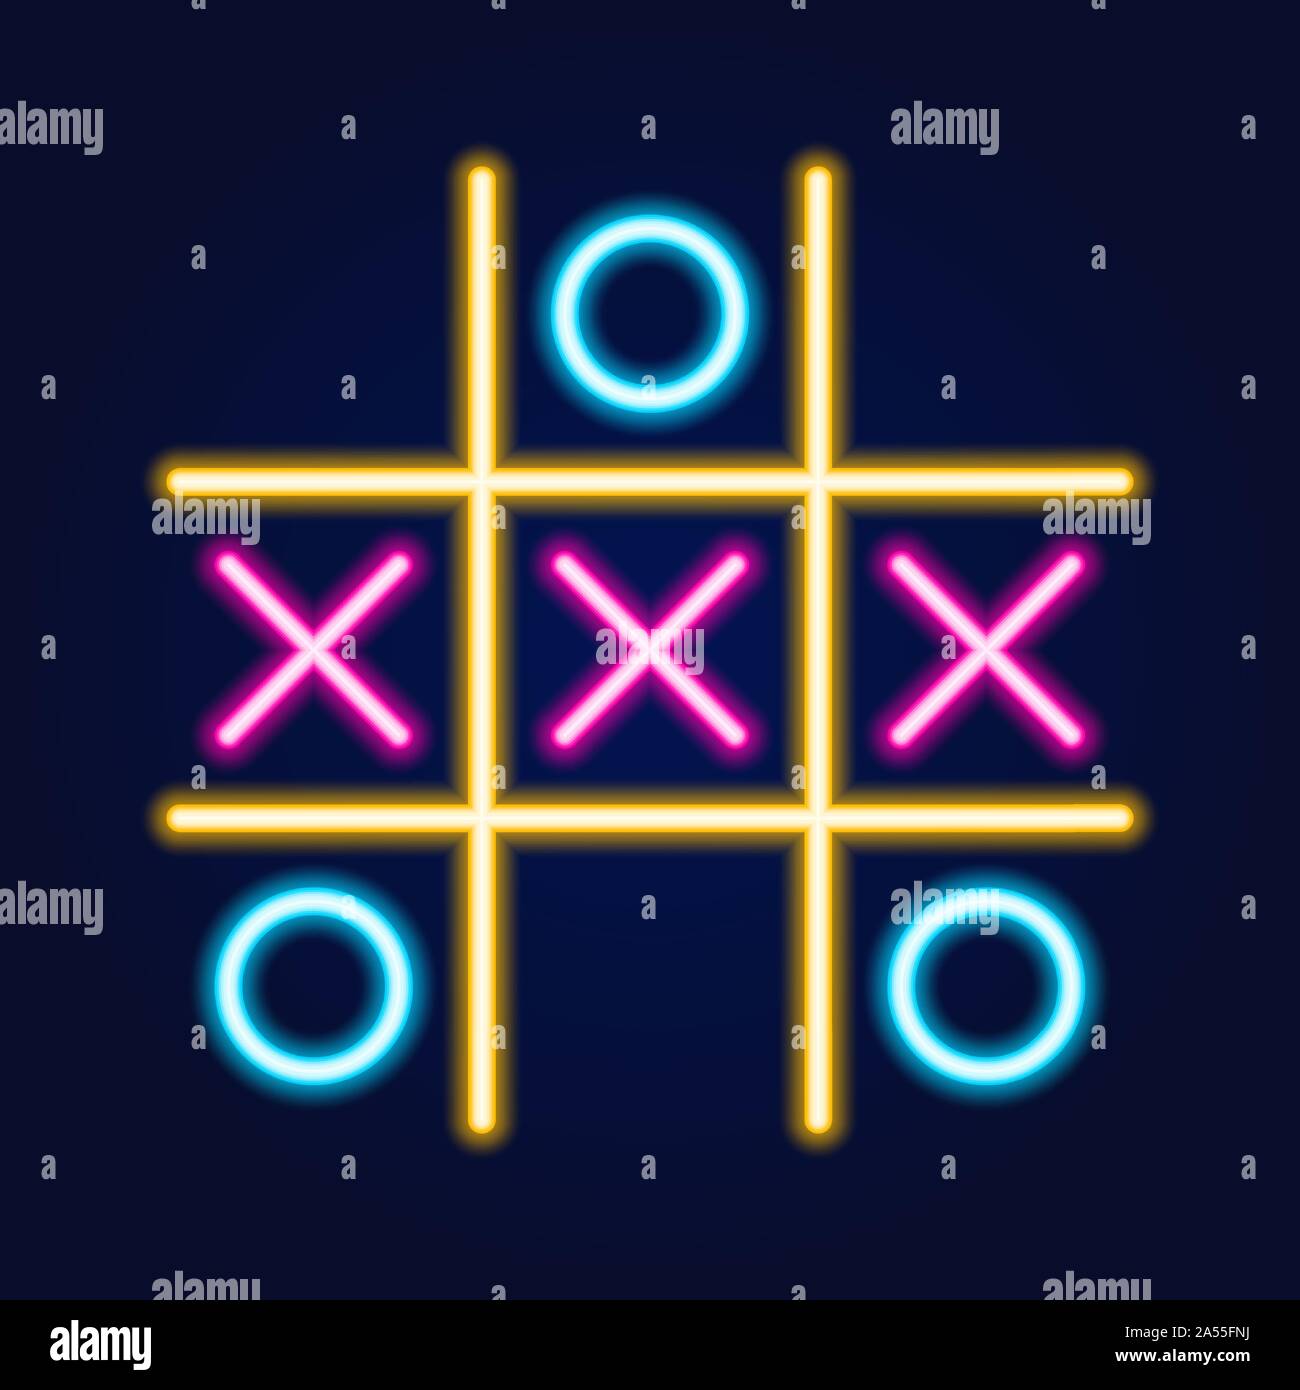 Tic tac toe glow Stock Vector Images - Alamy